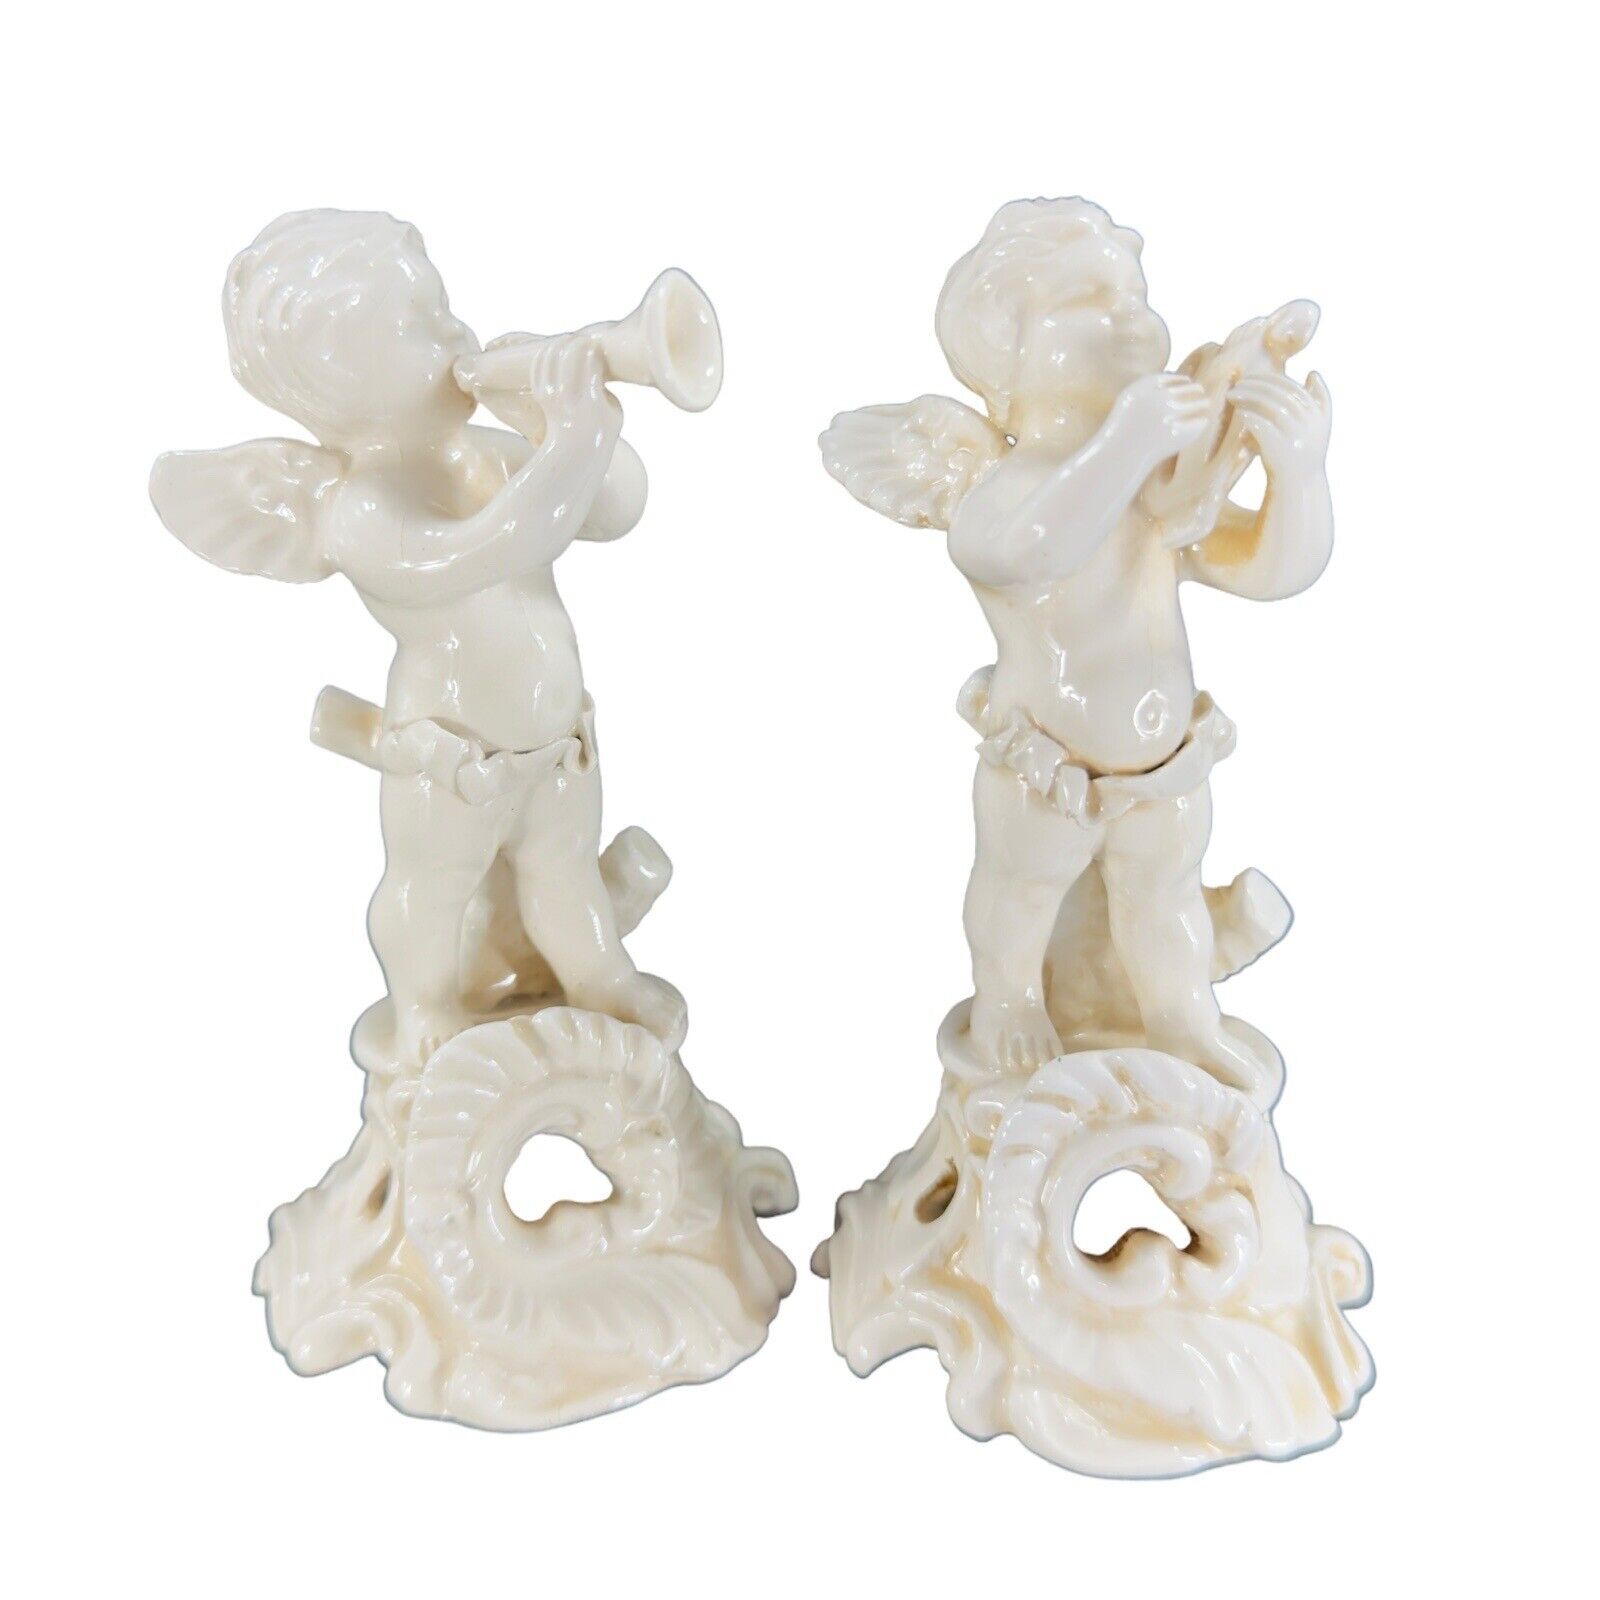 Vintage Italian Pottery Angels Playing Music Figurine Set 2 Made In Italy VTG